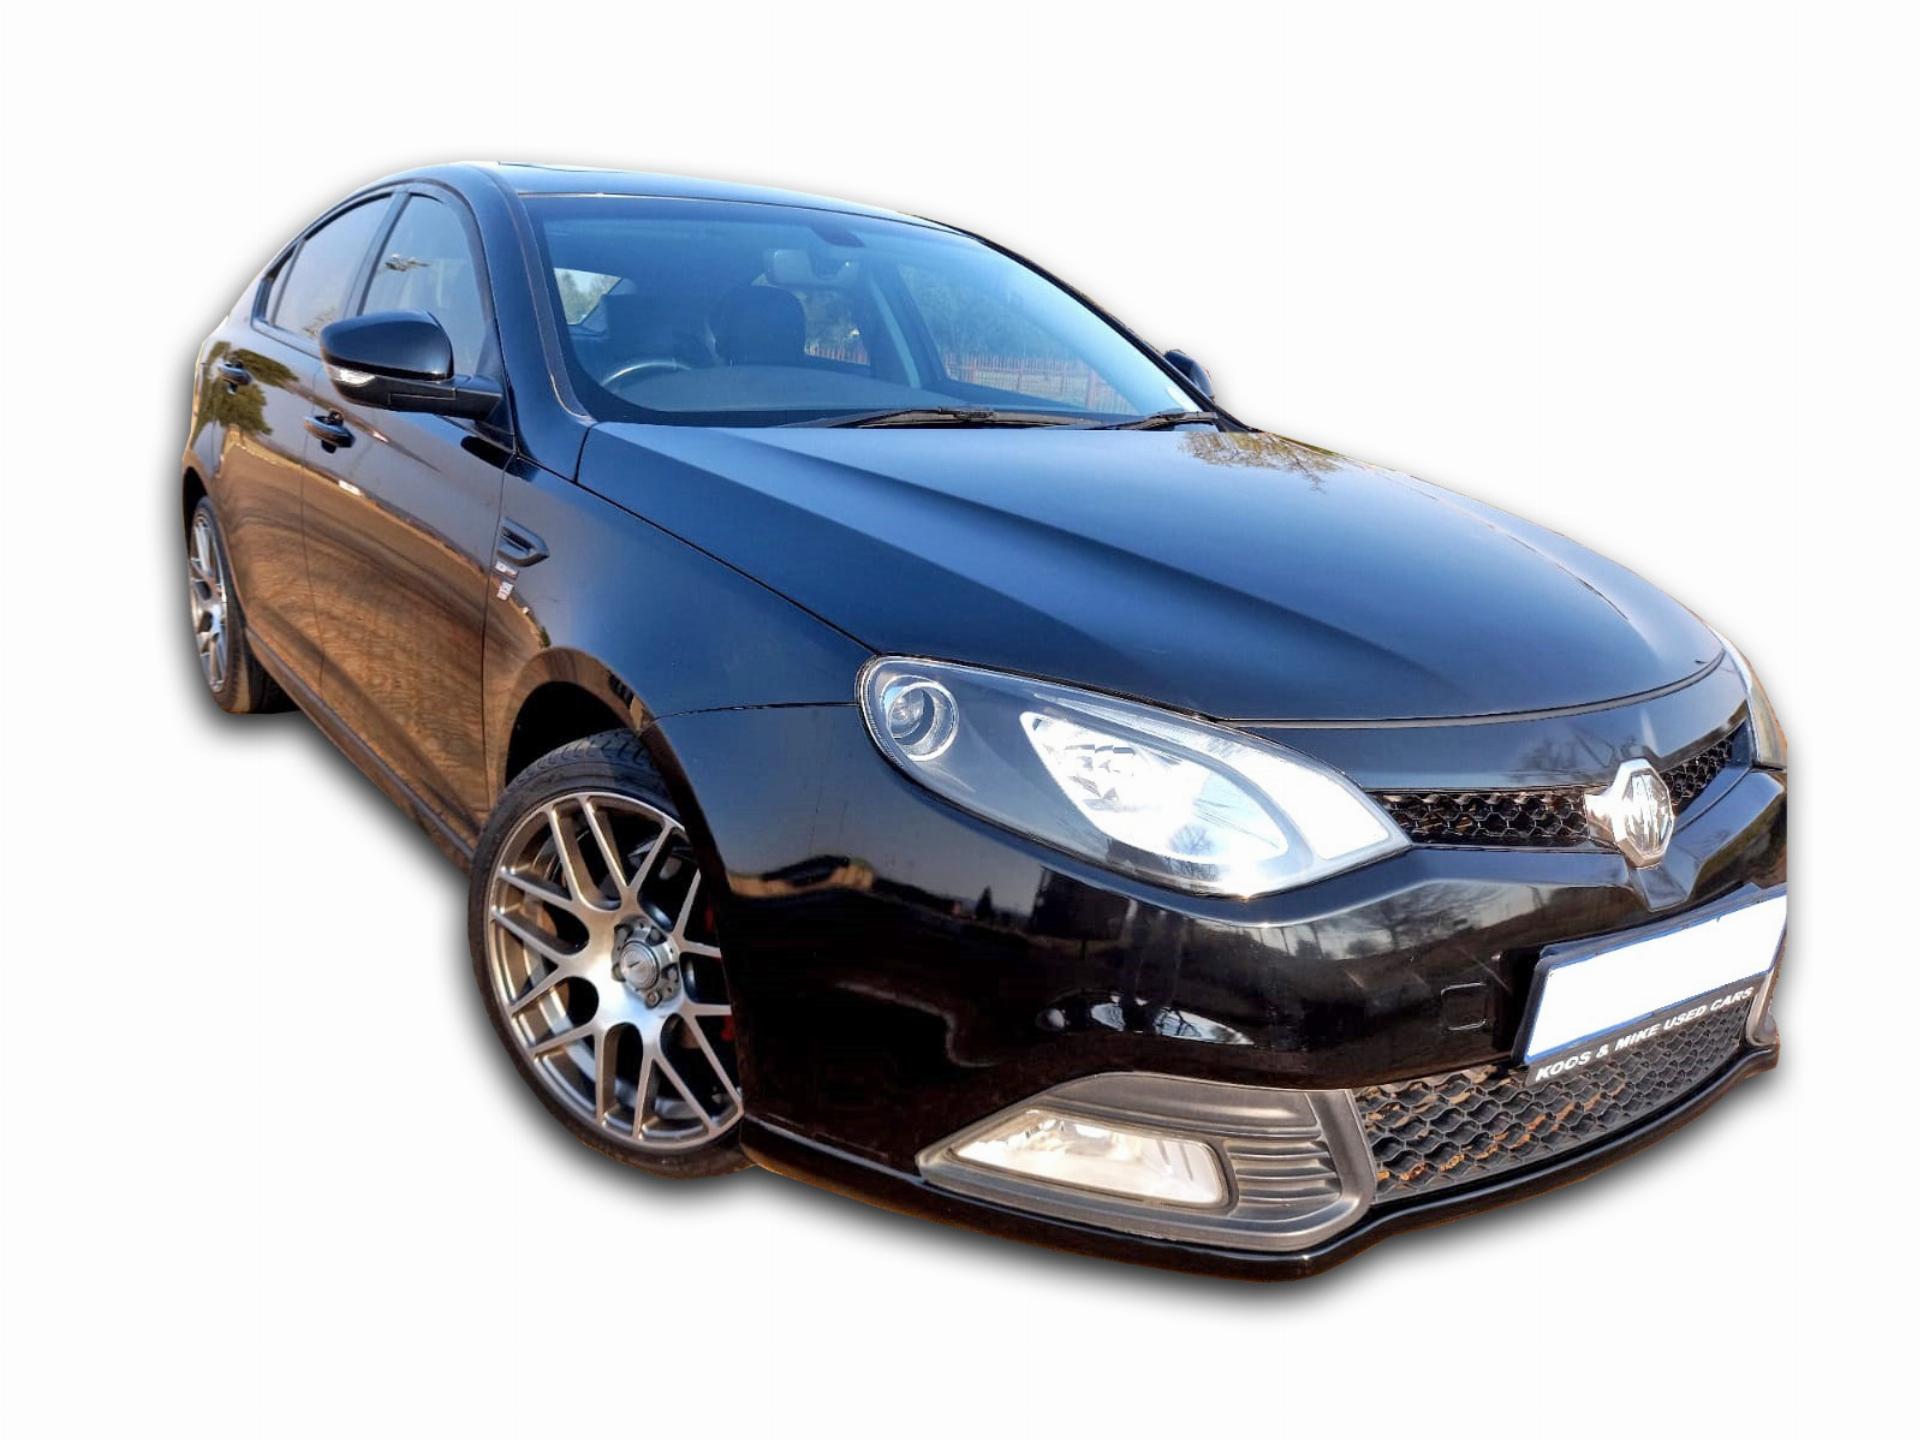 MG 6 1.8T Delux Motosport Edition 5DR